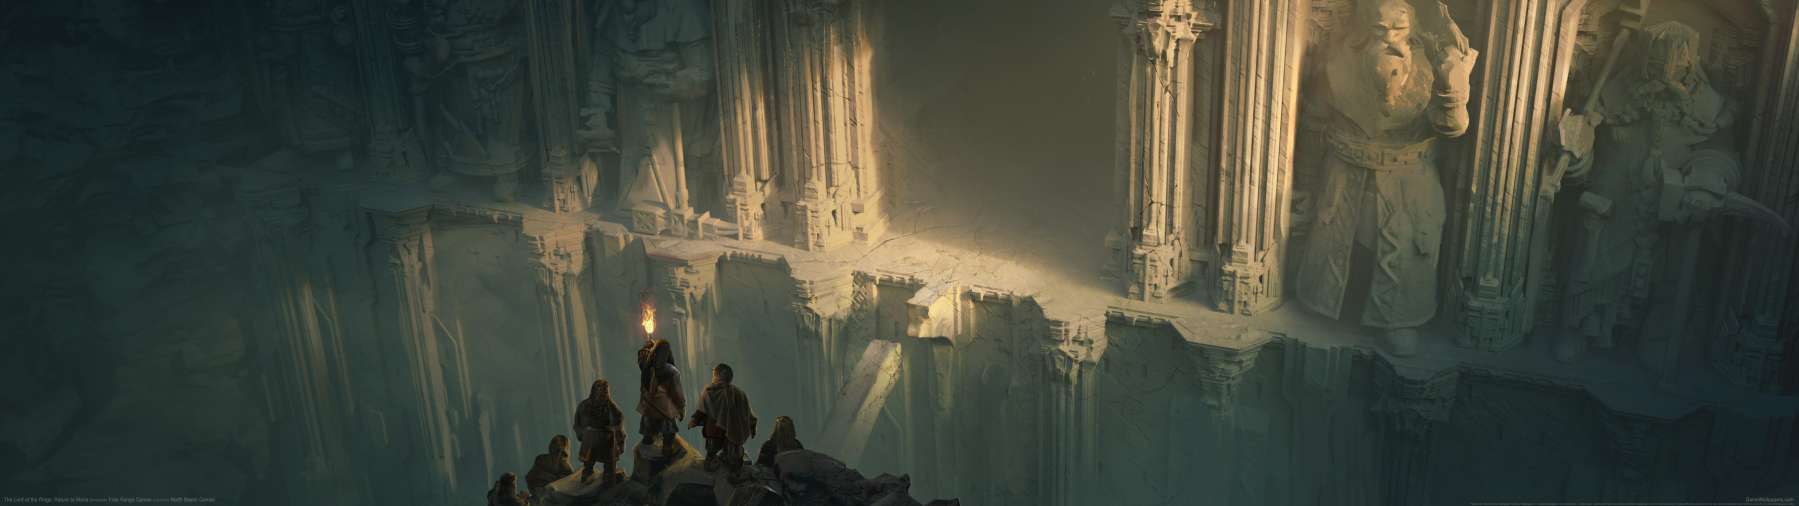 The Lord of the Rings: Return to Moria superwide fond d'cran 04